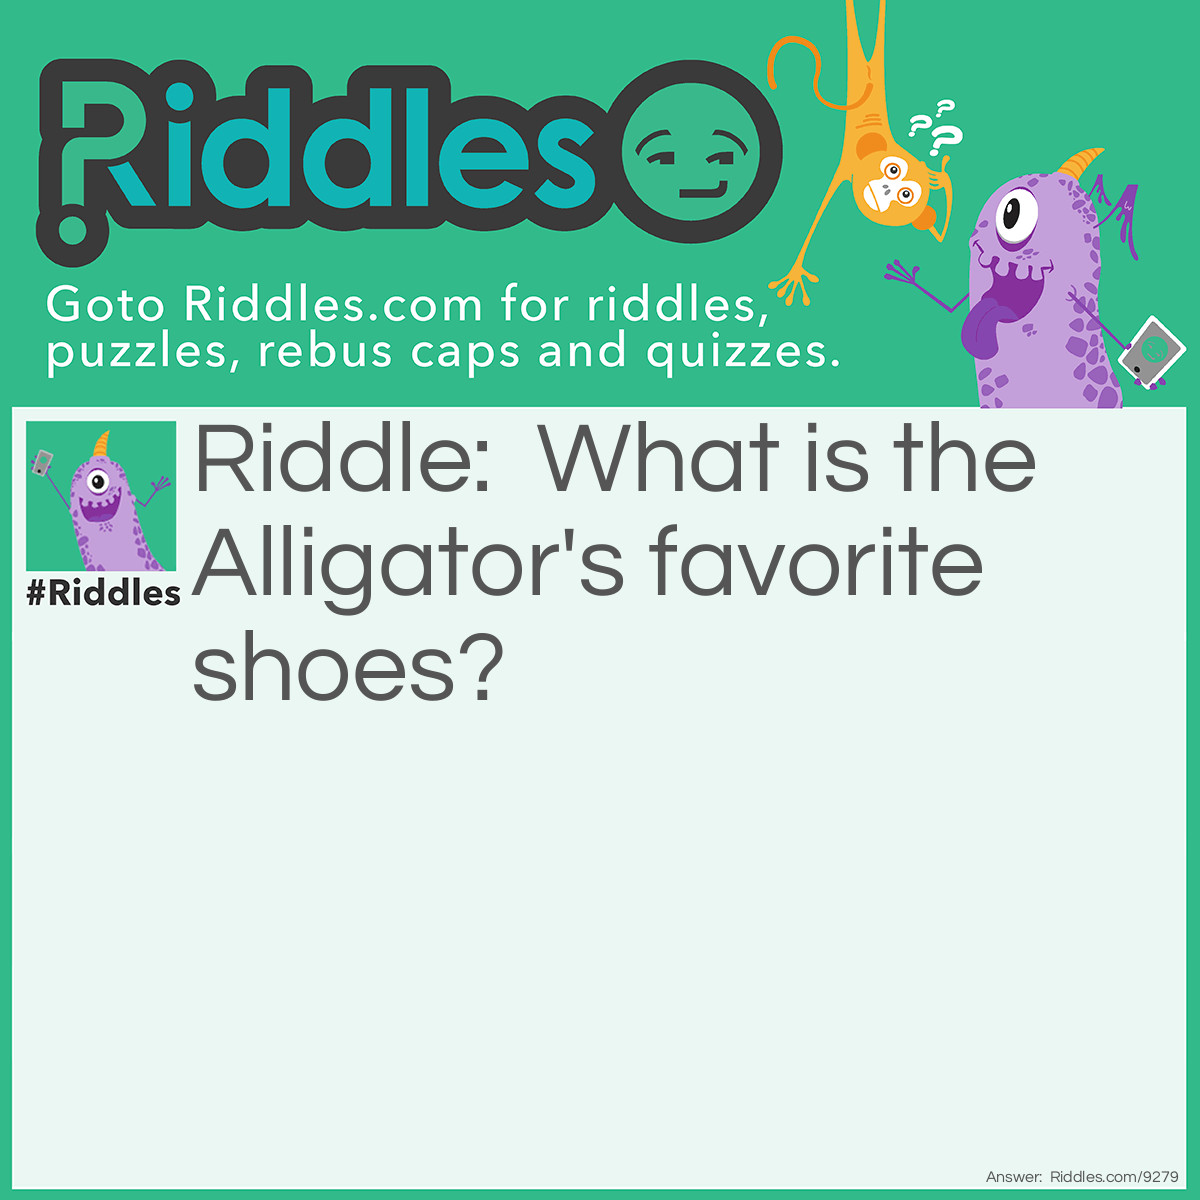 Riddle: What is the Alligator's favorite shoes? Answer: Crocs.